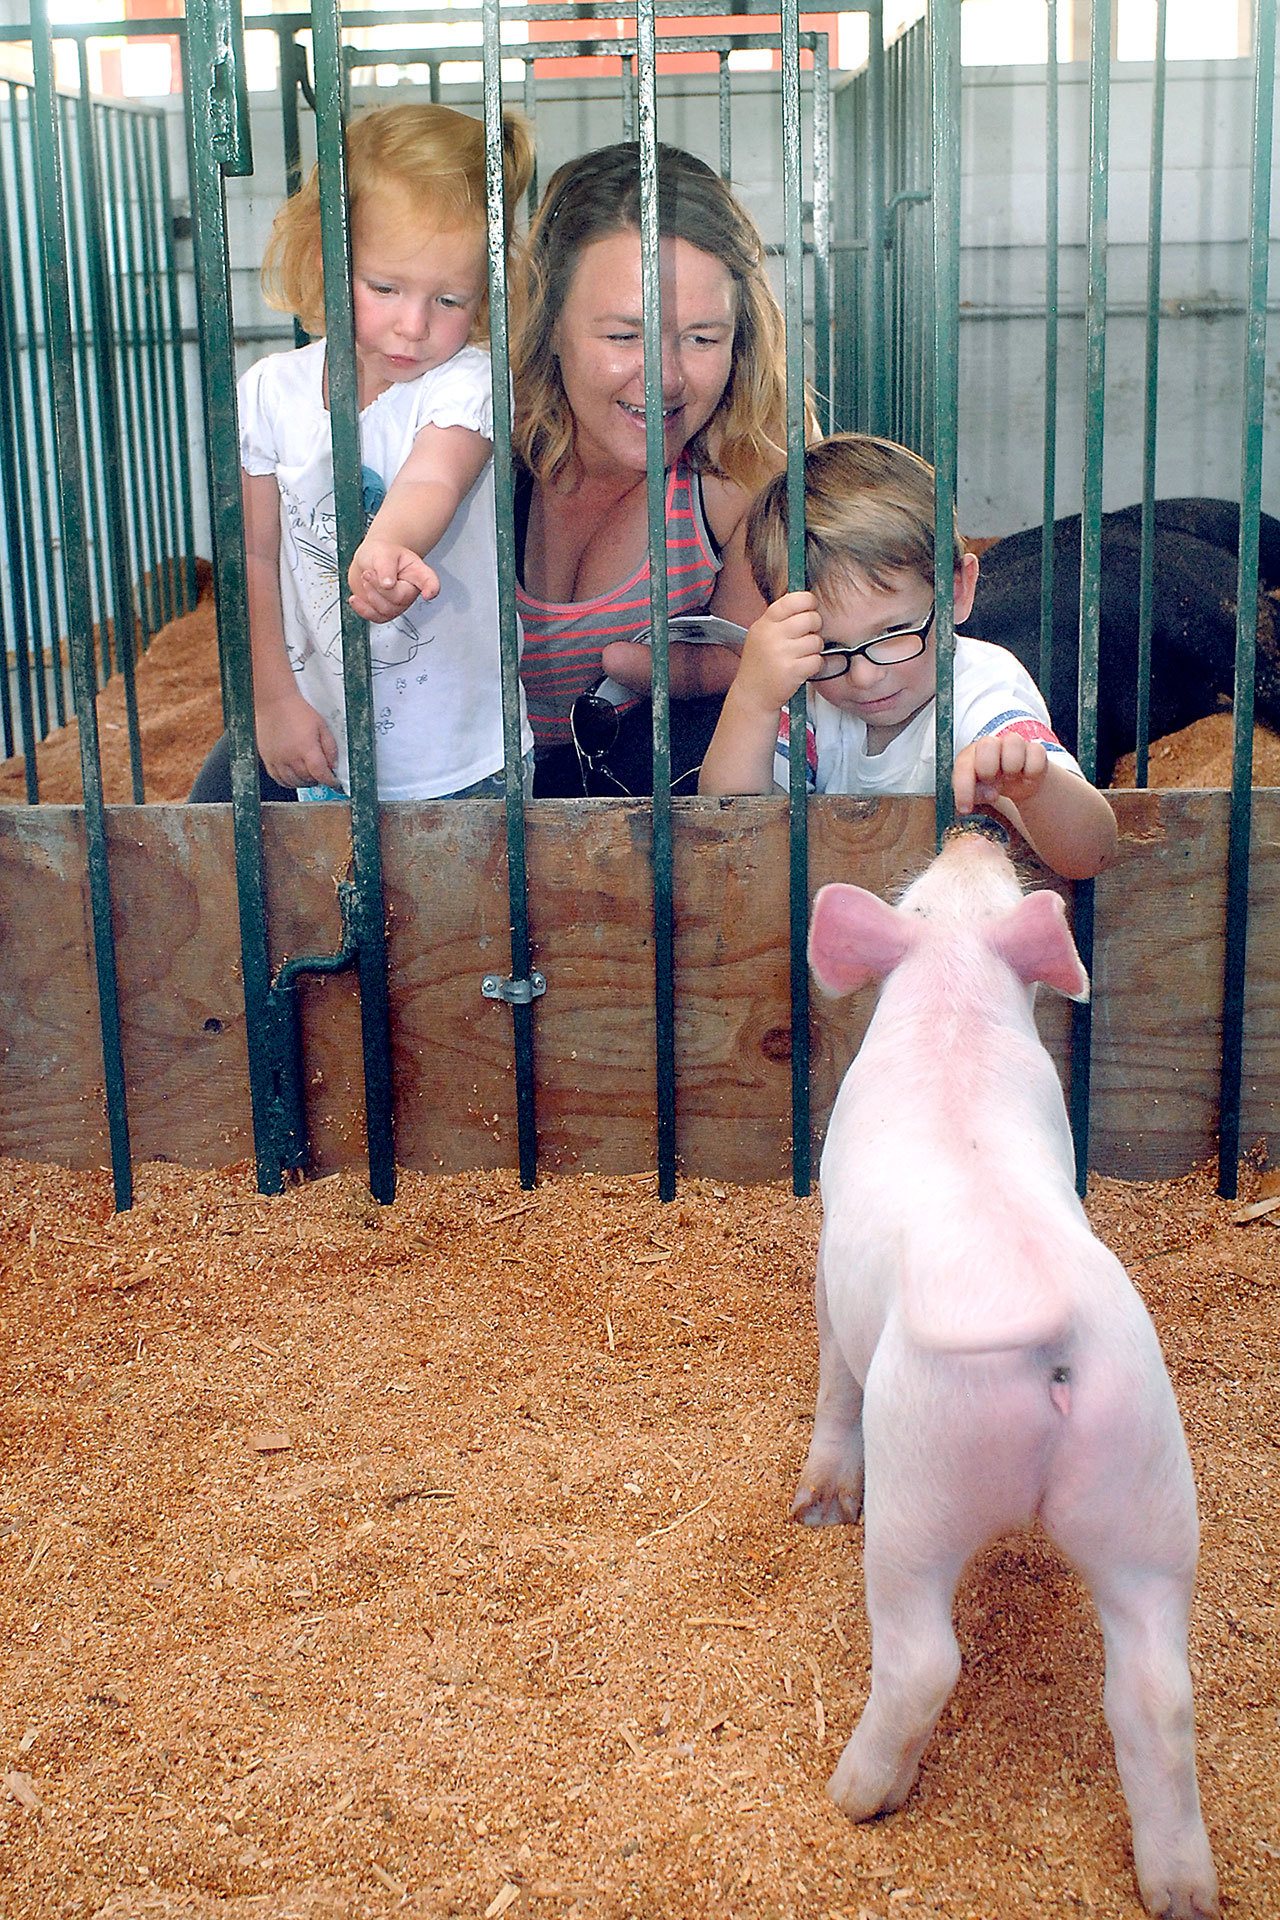 During the Clallam County Fair in Port Angeles on Friday, Meg Walton of Port Angeles and her children, Taylor, 2, and Miles, 4, look at a piglet born July 14 in the swine barn. (Keith Thorpe/Peninsula Daily News)